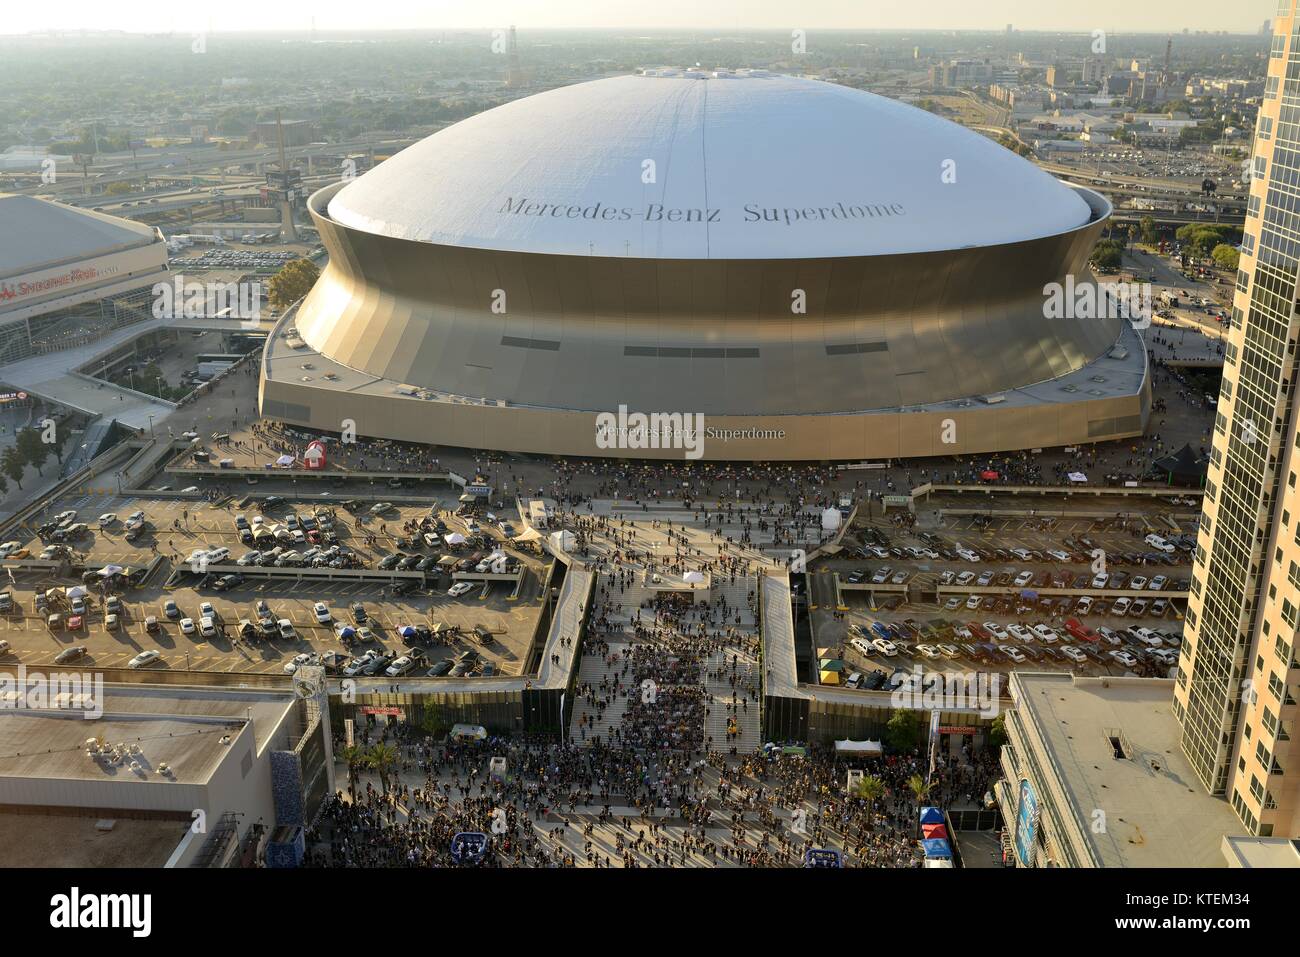 New Orleans' Superdome - Afternoon before Sunday Night NFL game between Green Bay Packers vs. New Orleans Saints, Superdome was filled with fans. Stock Photo